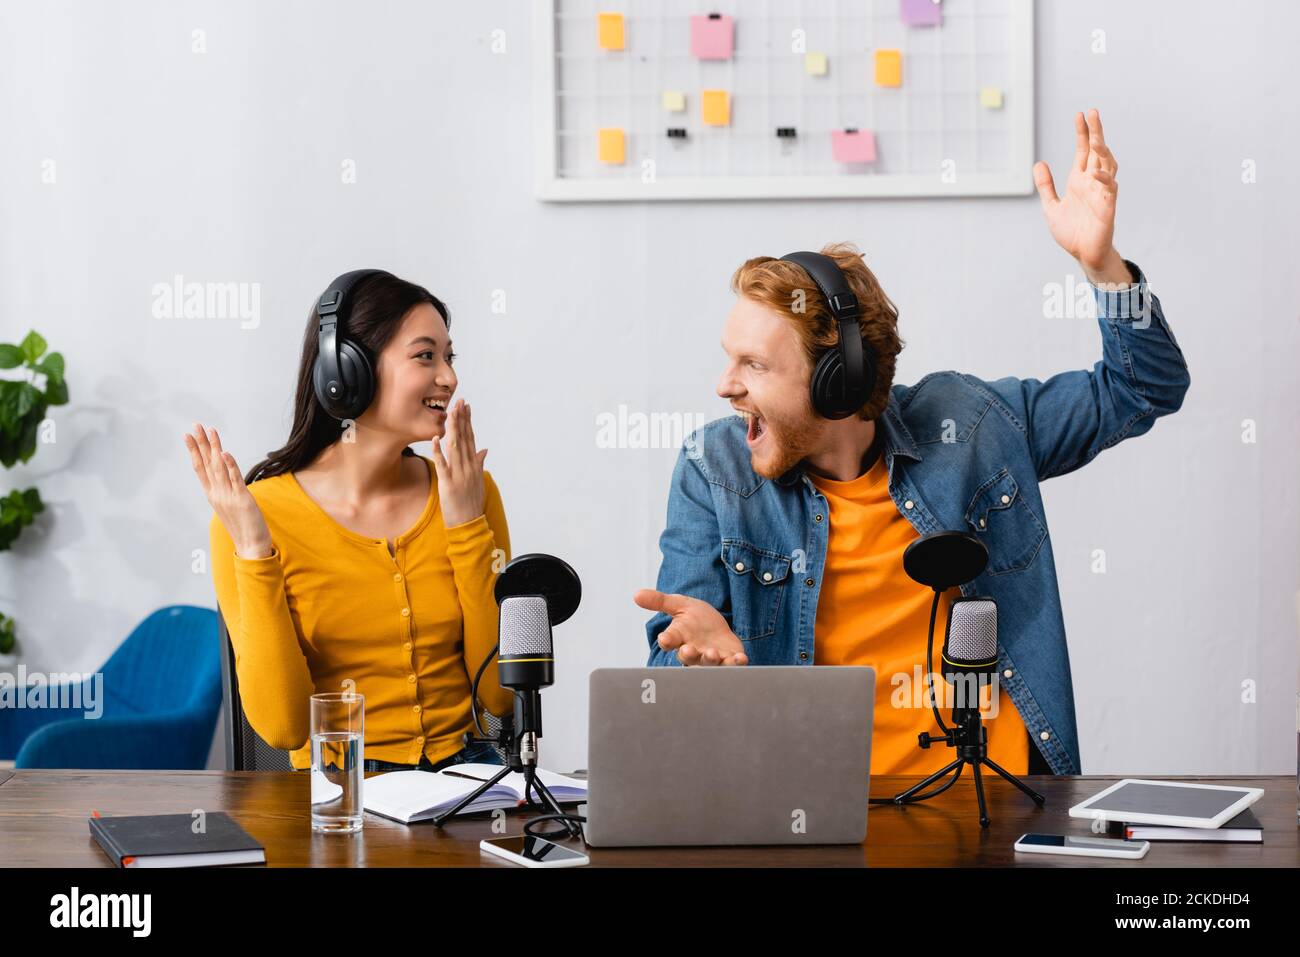 excited multicultural broadcasters in wireless headphones gesturing and looking at each other at workplace Stock Photo